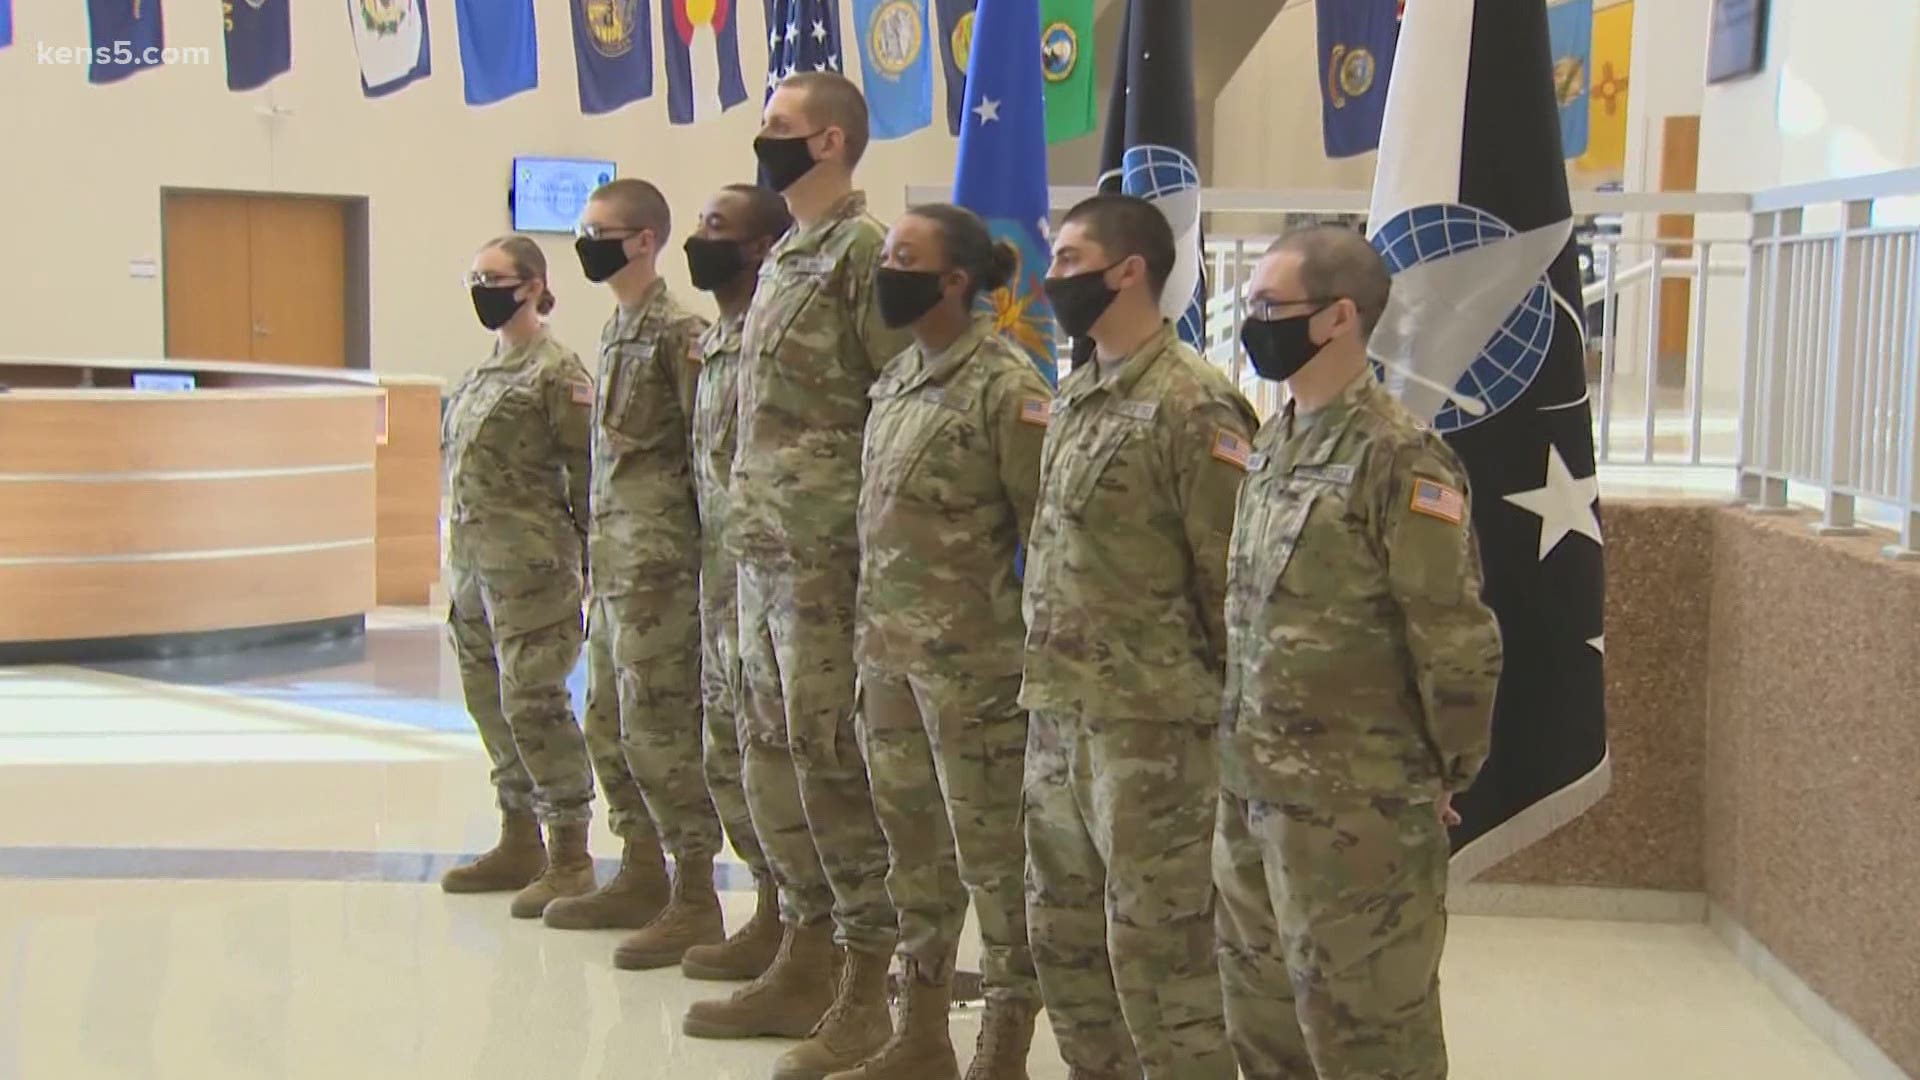 The first seven U.S. Space Force enlistees graduated alongside hundreds of new US Air Force airmen at a ceremony in San Antonio.